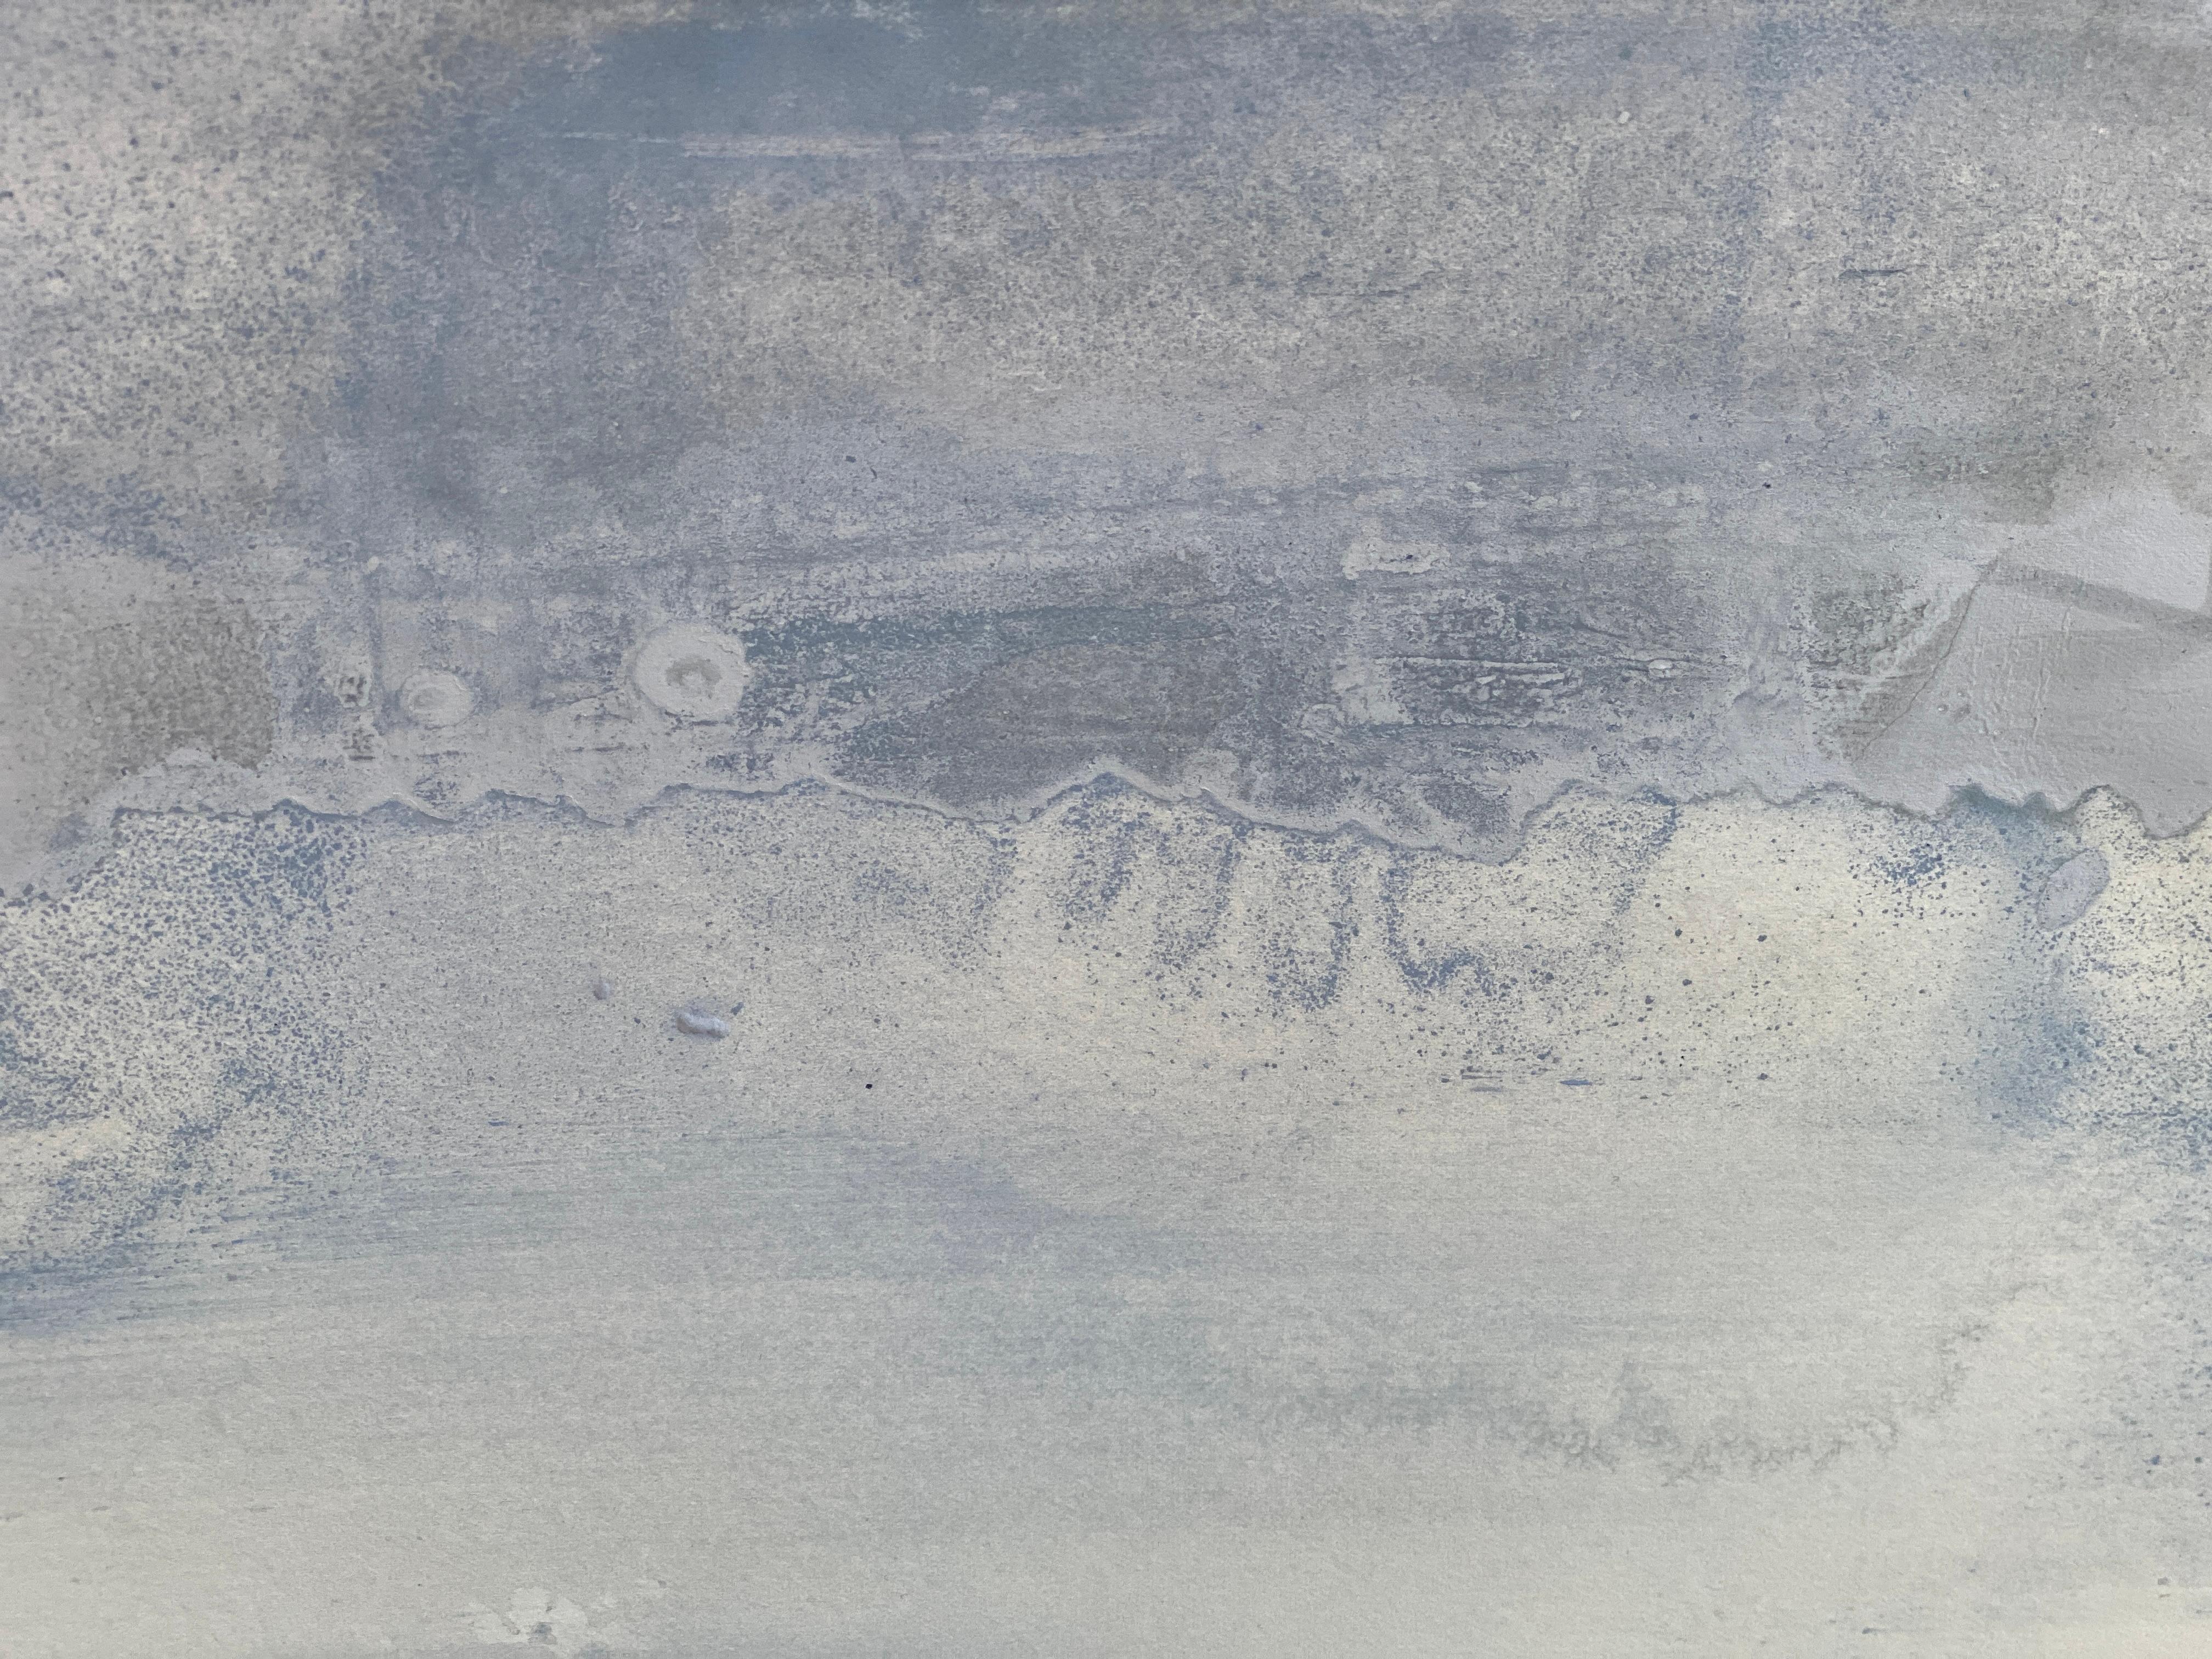 Snowy Grey no1 Nordic Scandi abstract landscape minimal white fine art painting For Sale 9